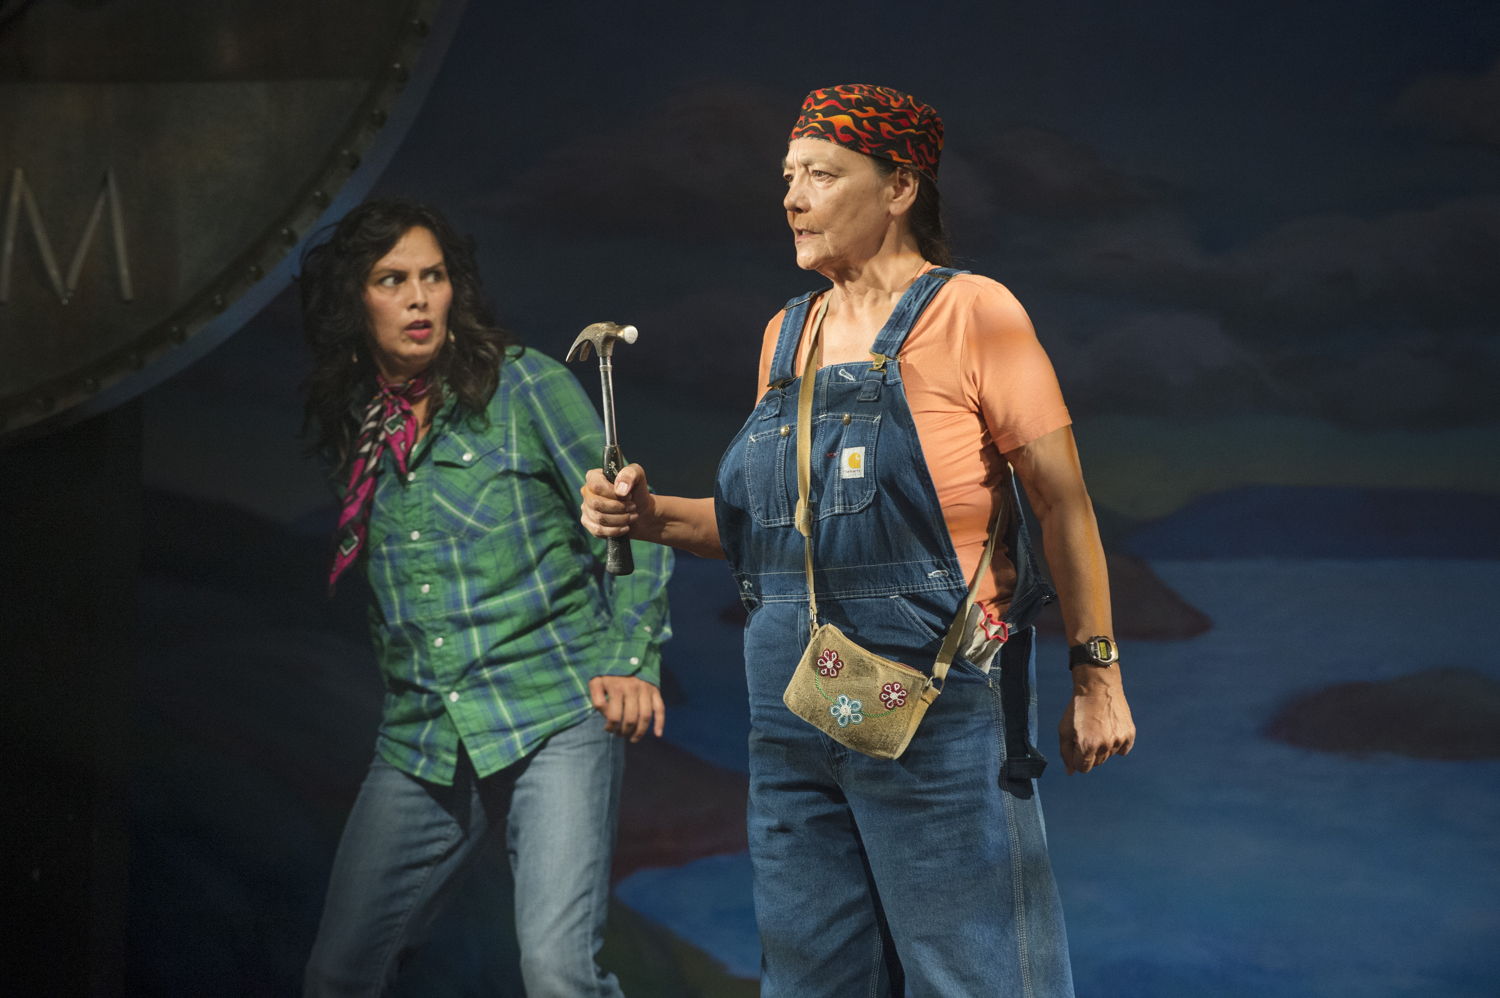 Lisa C. Ravensbergen (as Annie Cook) and Tantoo Cardinal (as Pelajia Patchnose) in The Rez Sisters by Tomson Highway / Photos by David Cooper / <a href="http://www.belfry.bc.ca/the-rez-sisters/" rel="nofollow">www.belfry.bc.ca/the-rez-sisters/</a>